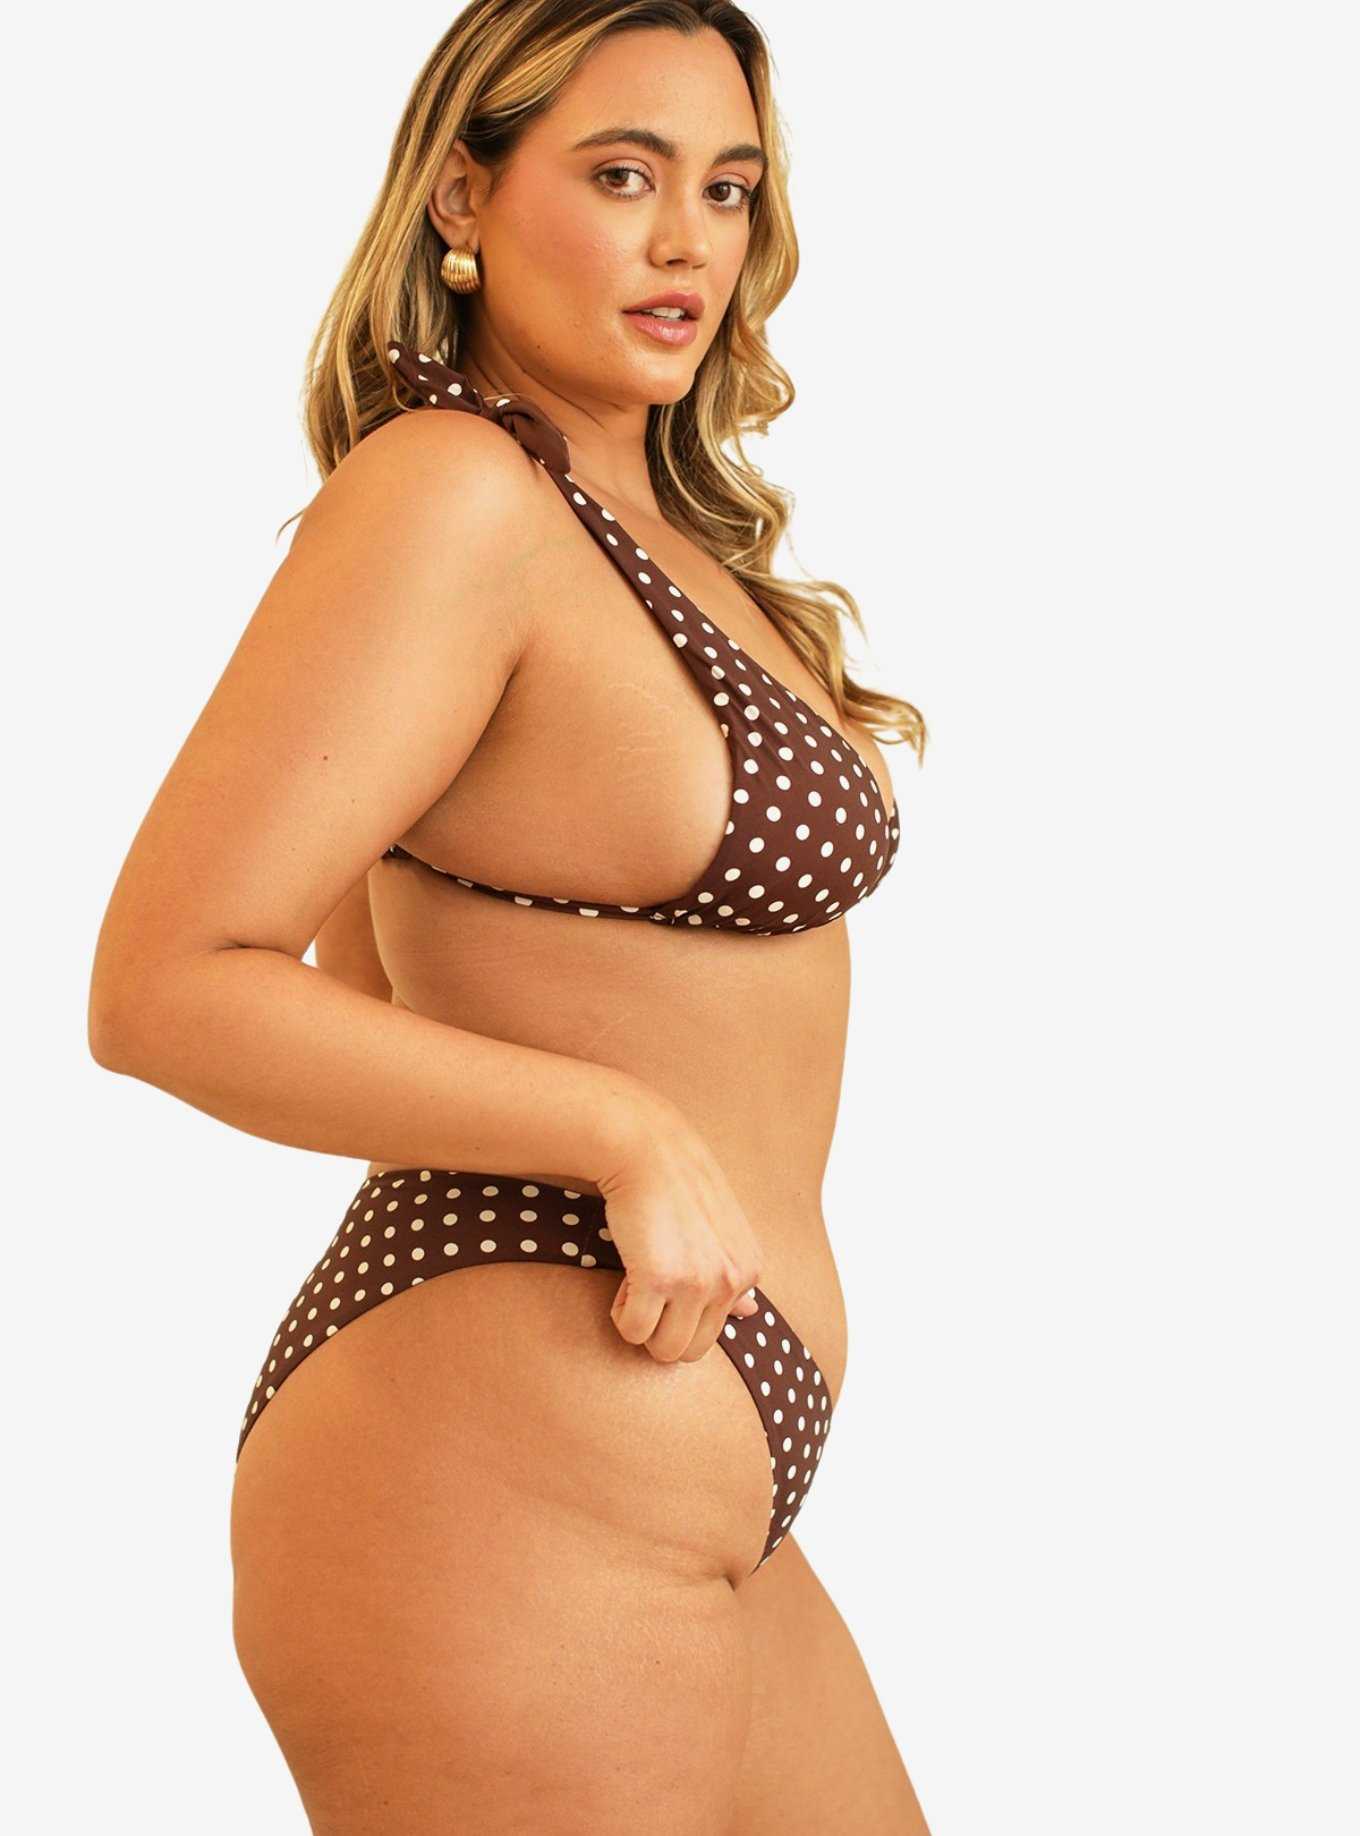 Dippin' Daisy's Angel Cheeky Swim Bottom Dotted Brown, , hi-res